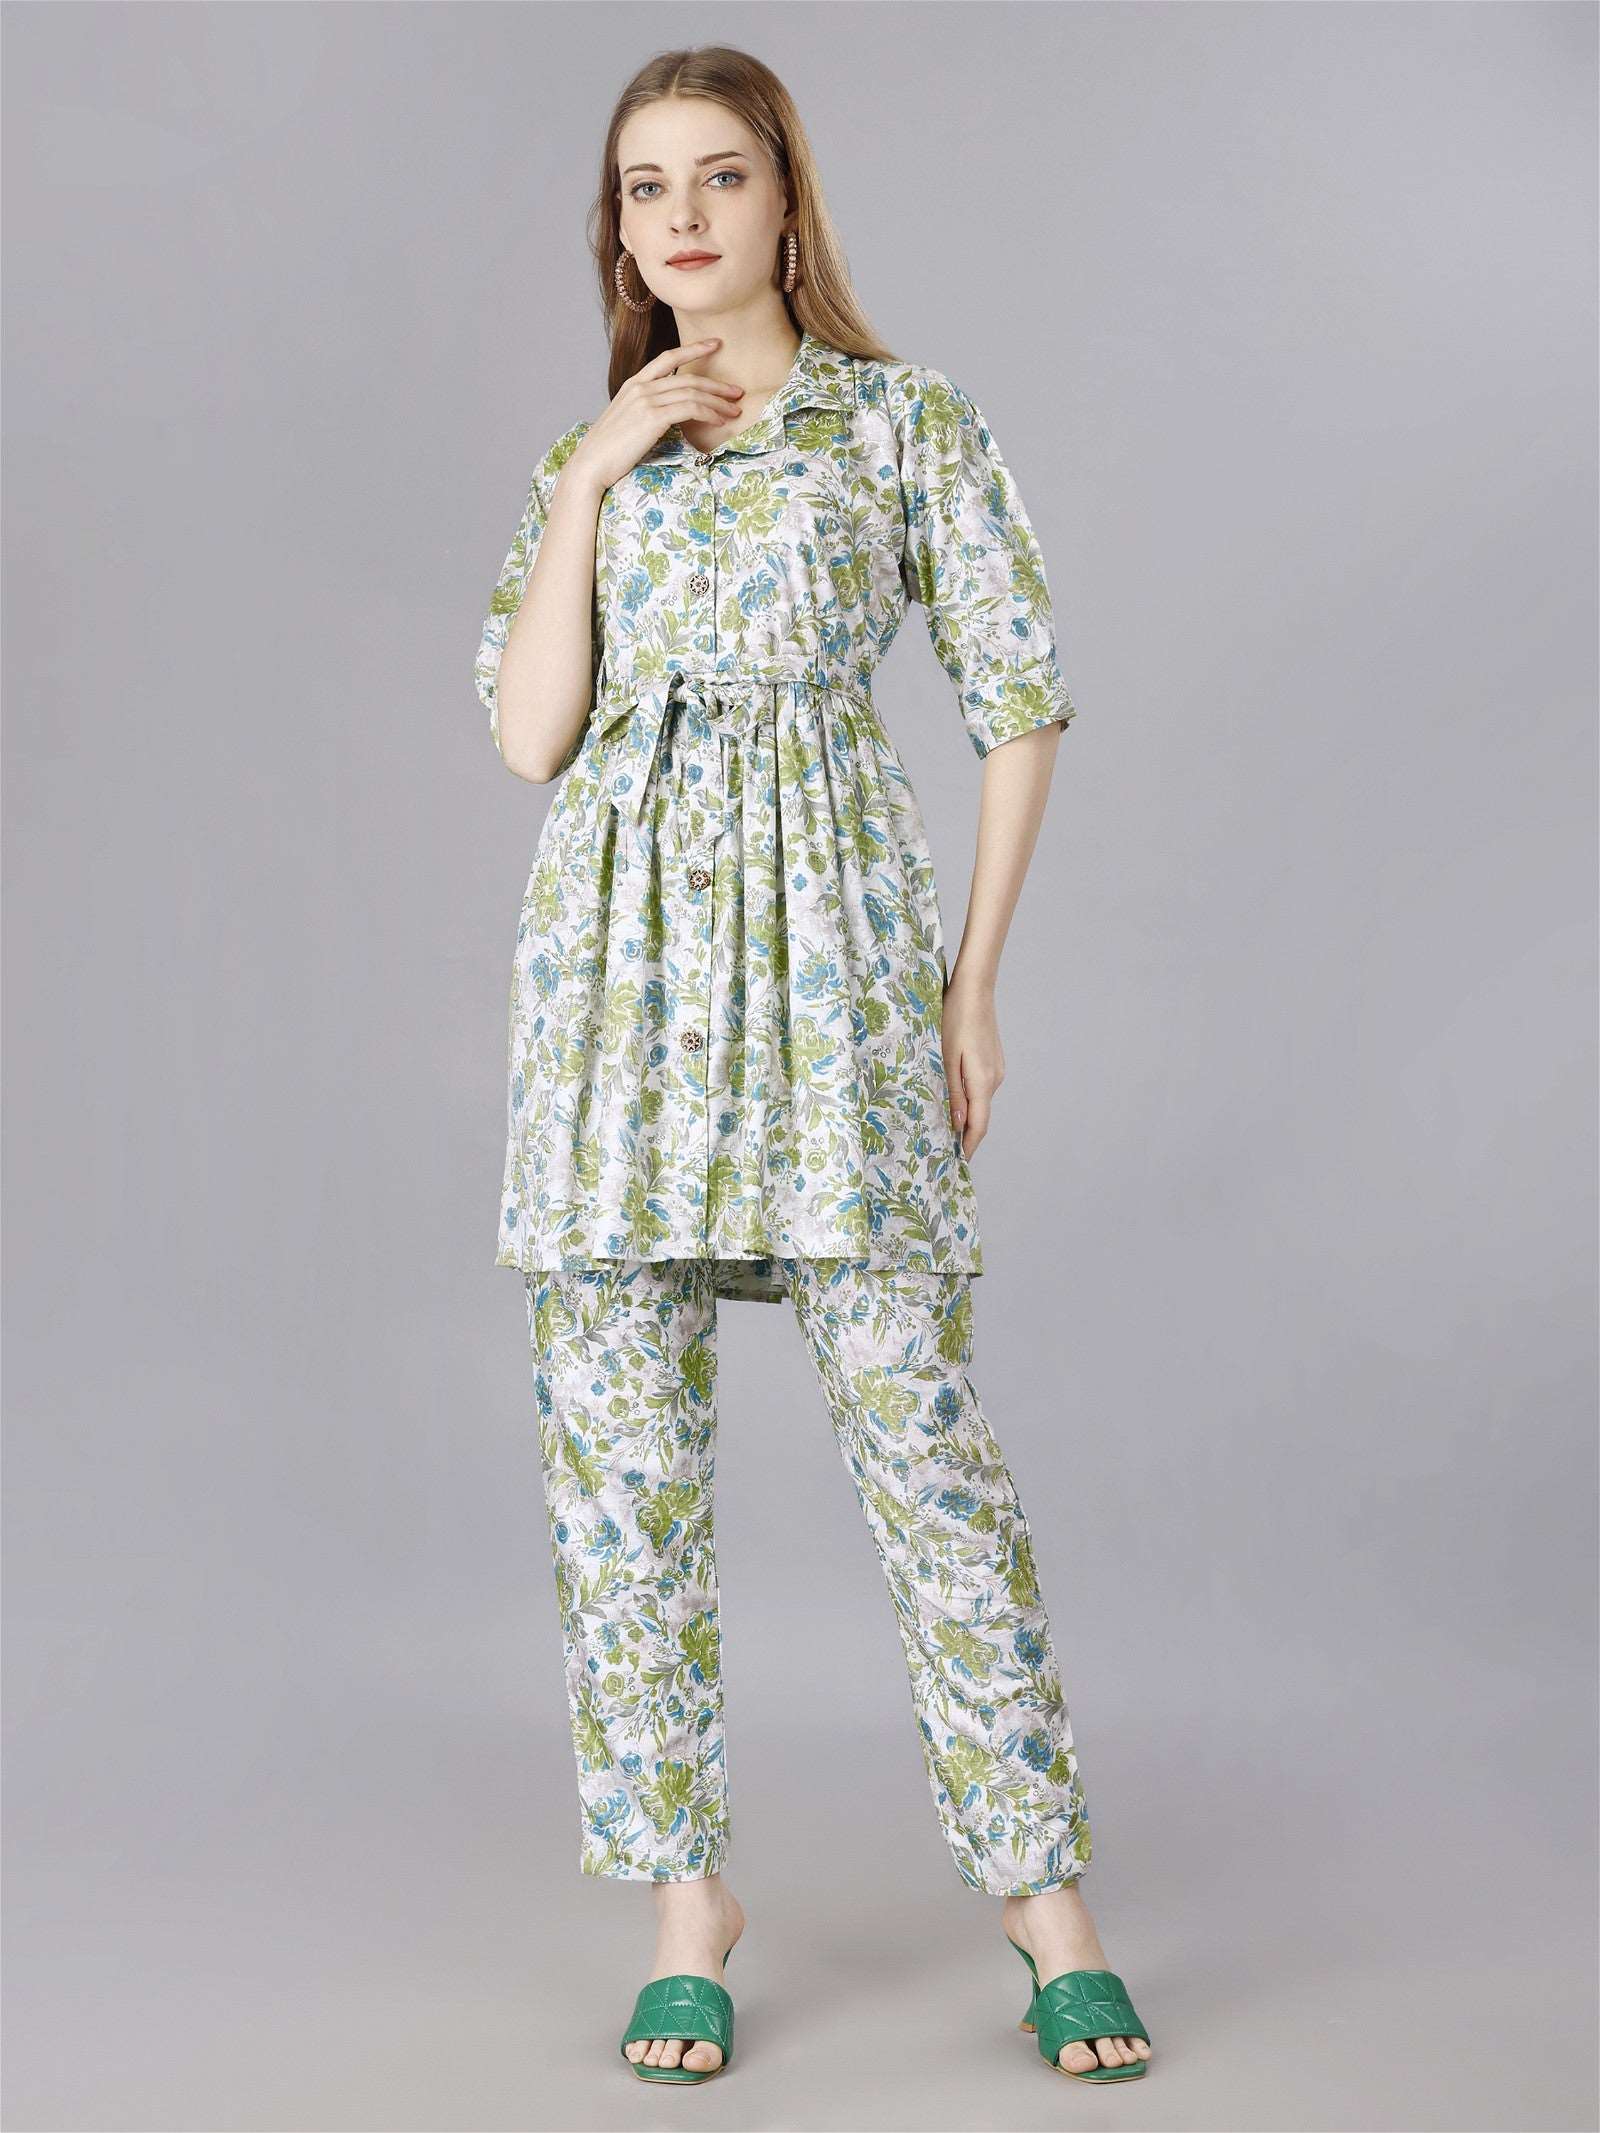 The model in the image is wearing Printed Green Cotton 2-Piece Shirt & Trousers Set from Alice Milan. Crafted with the finest materials and impeccable attention to detail, the  looks premium, trendy, luxurious and offers unparalleled comfort. It’s a perfect clothing option for loungewear, resort wear, party wear or for an airport look. The woman in the image looks happy, and confident with her style statement putting a happy smile on her face.